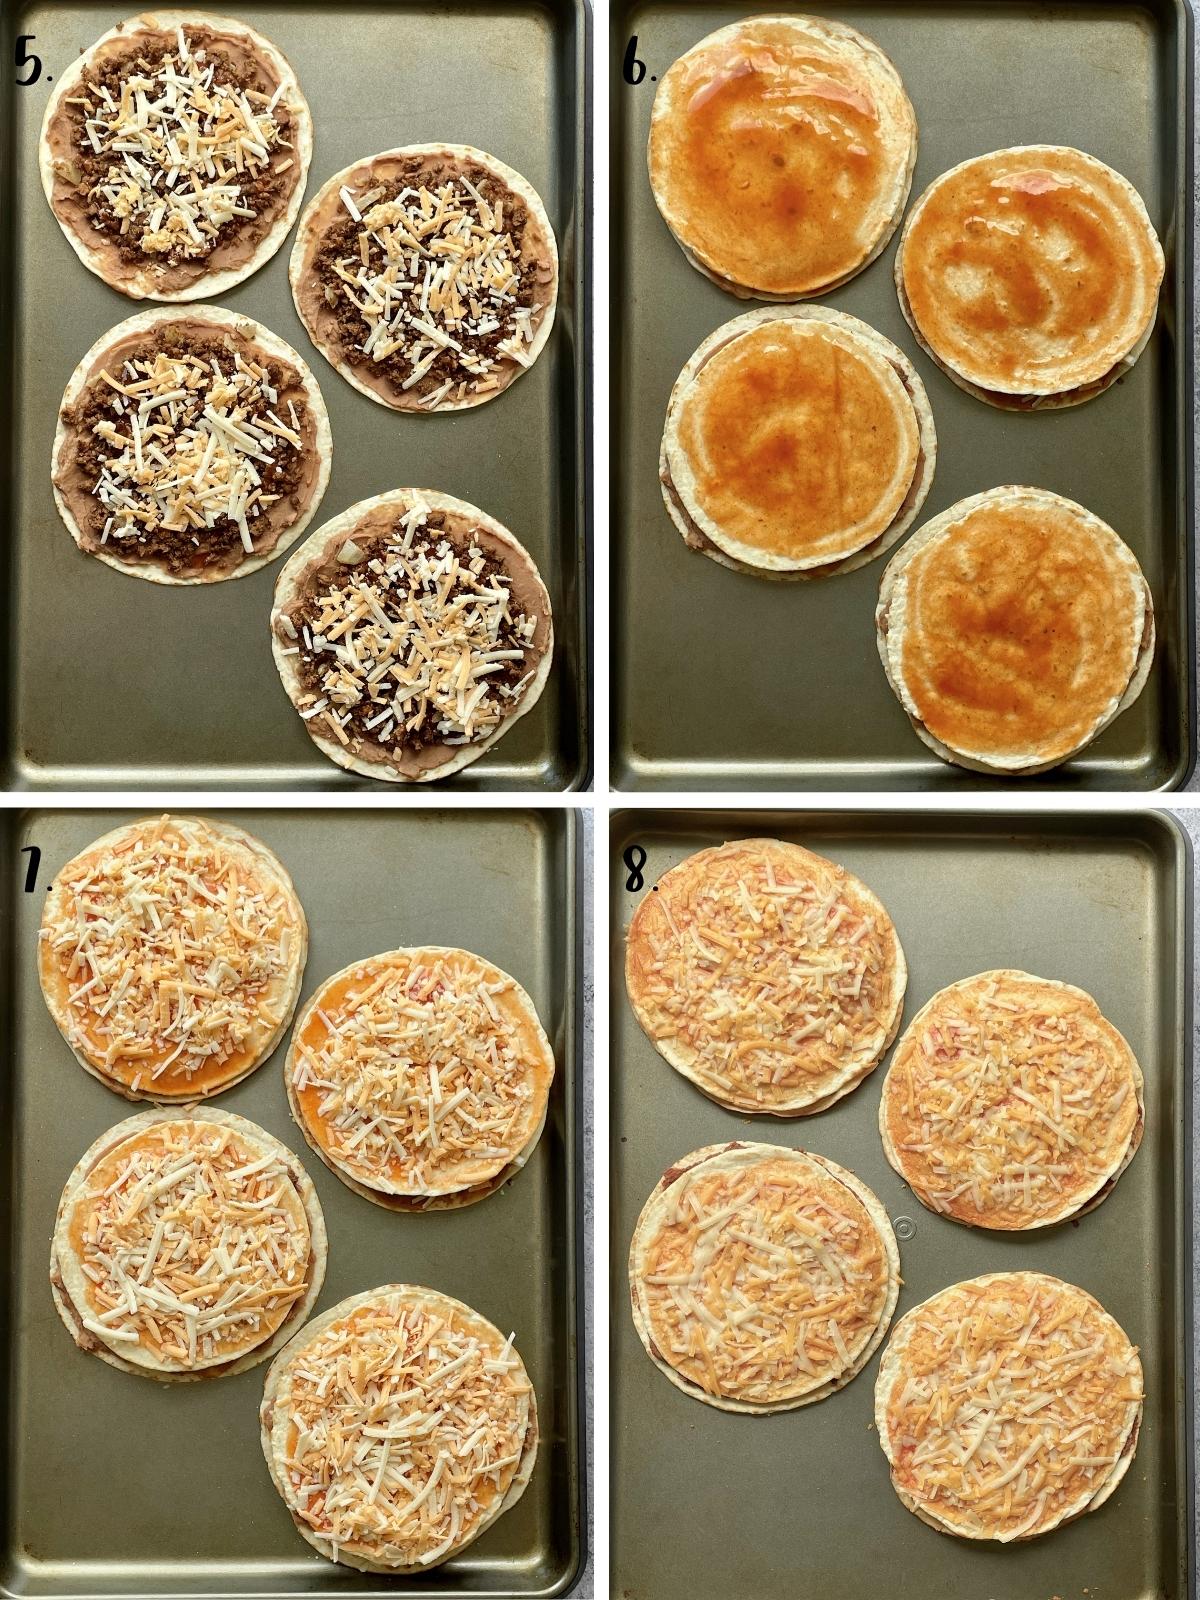 Second set of process steps for Mexican pizza.